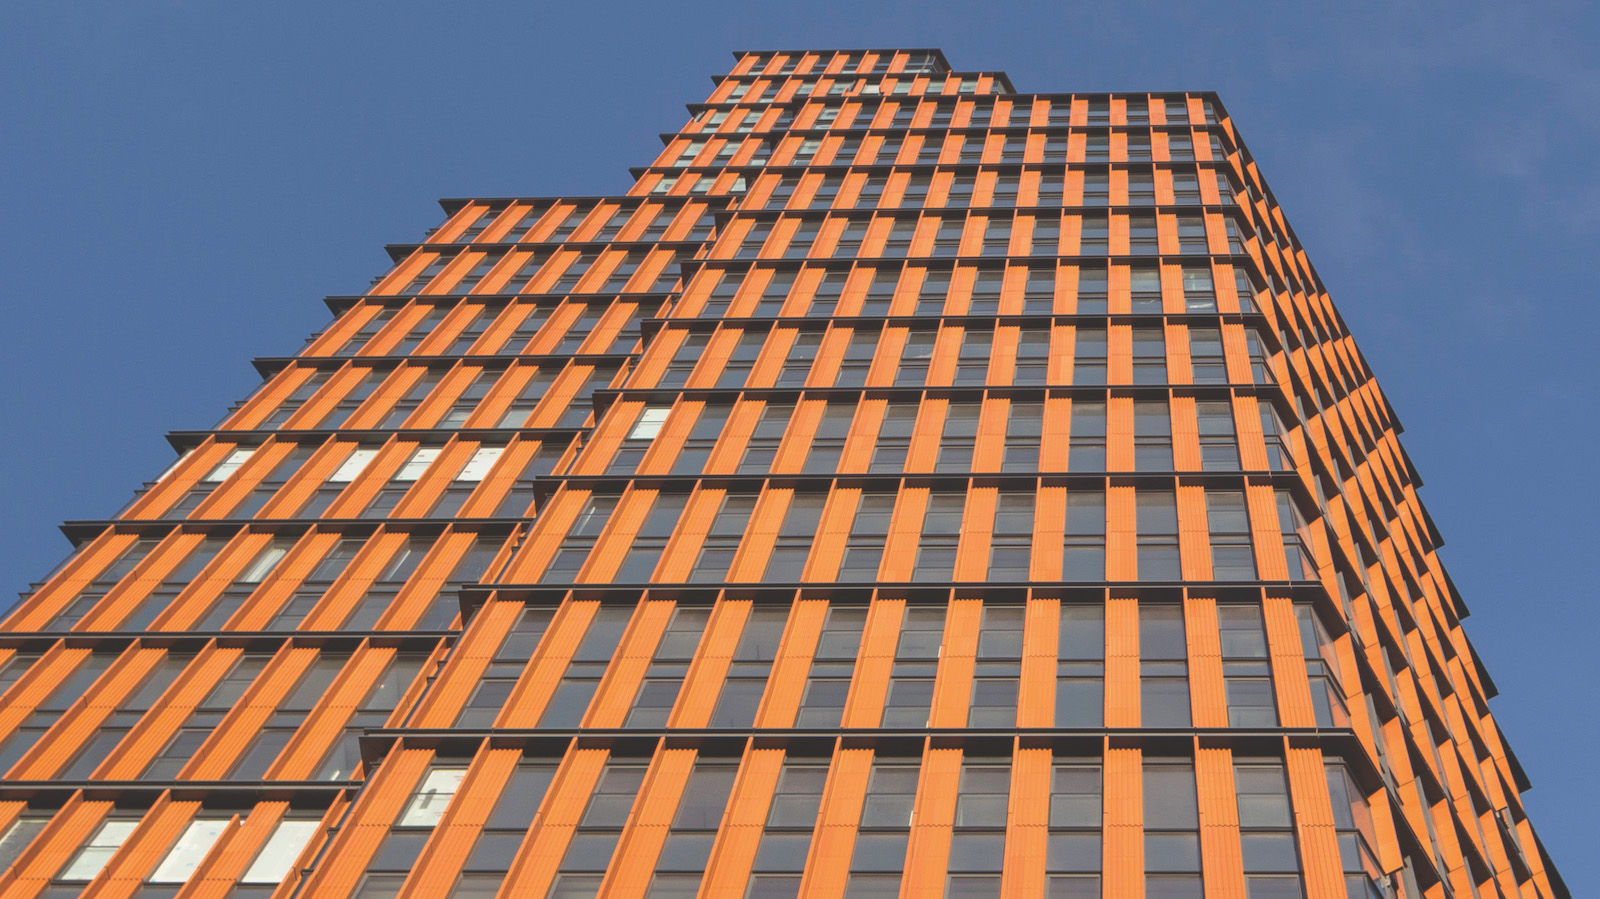 The cladding features glazed terracotta fins on the external perimeters of the towers. Photo credit: Agnese Sanvito